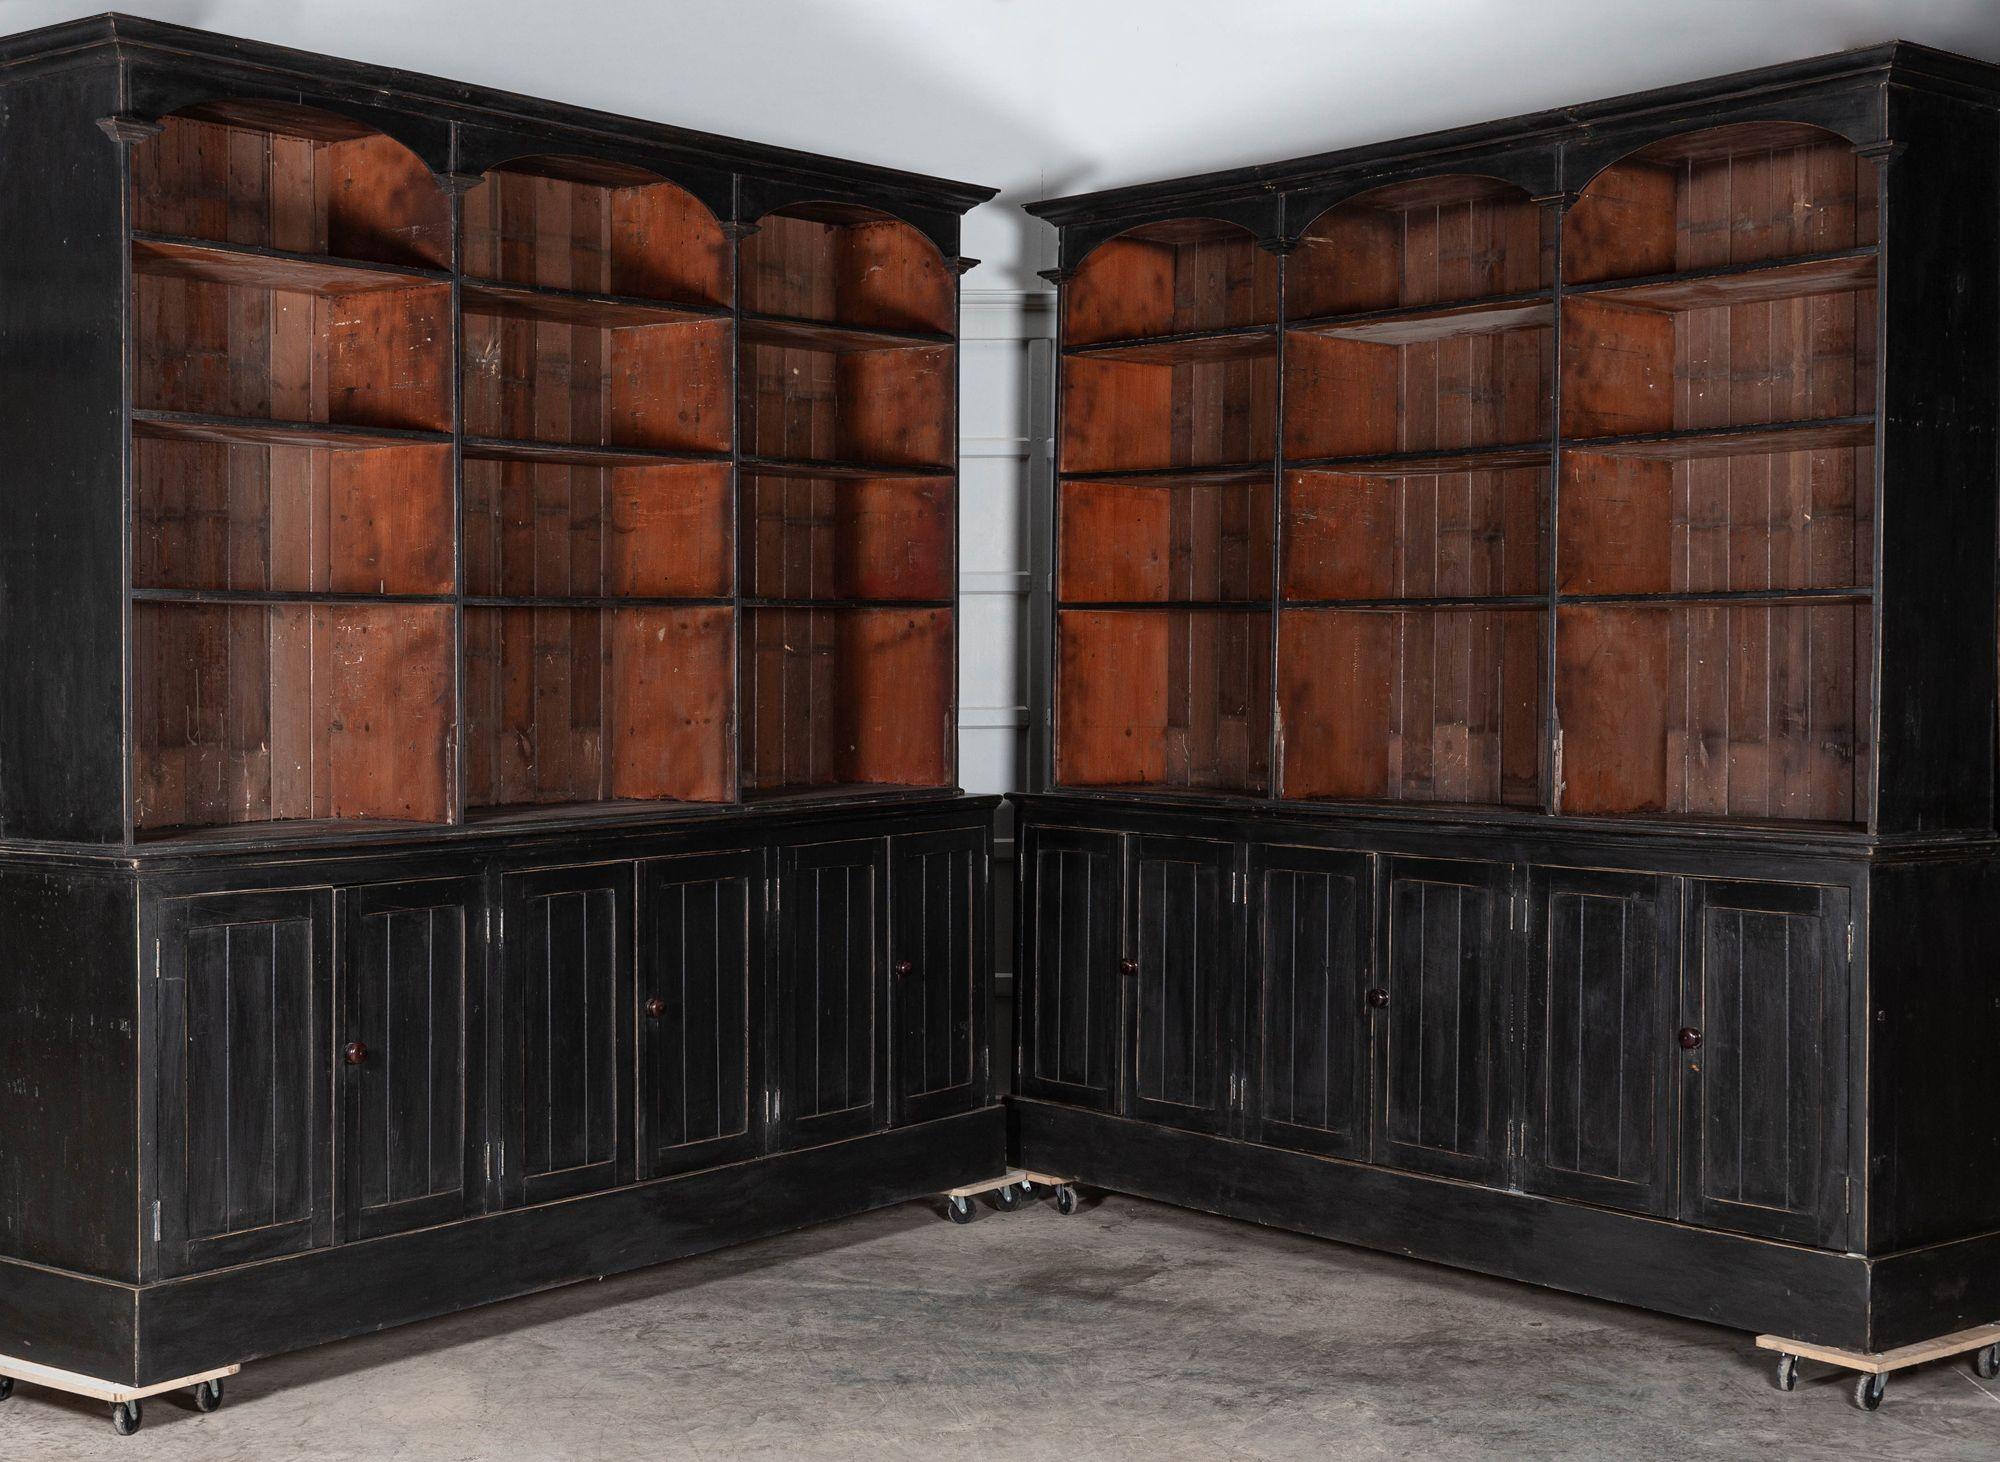 circa 1915
Pair Monumental English Ebonised Bookcase / Display Cabinets
Provenance: Huge original shop fittings from the former Co-operative Society building, Swadlincote, Derbyshire, England, UK.
The former Midland Co-op, in West Street, was built